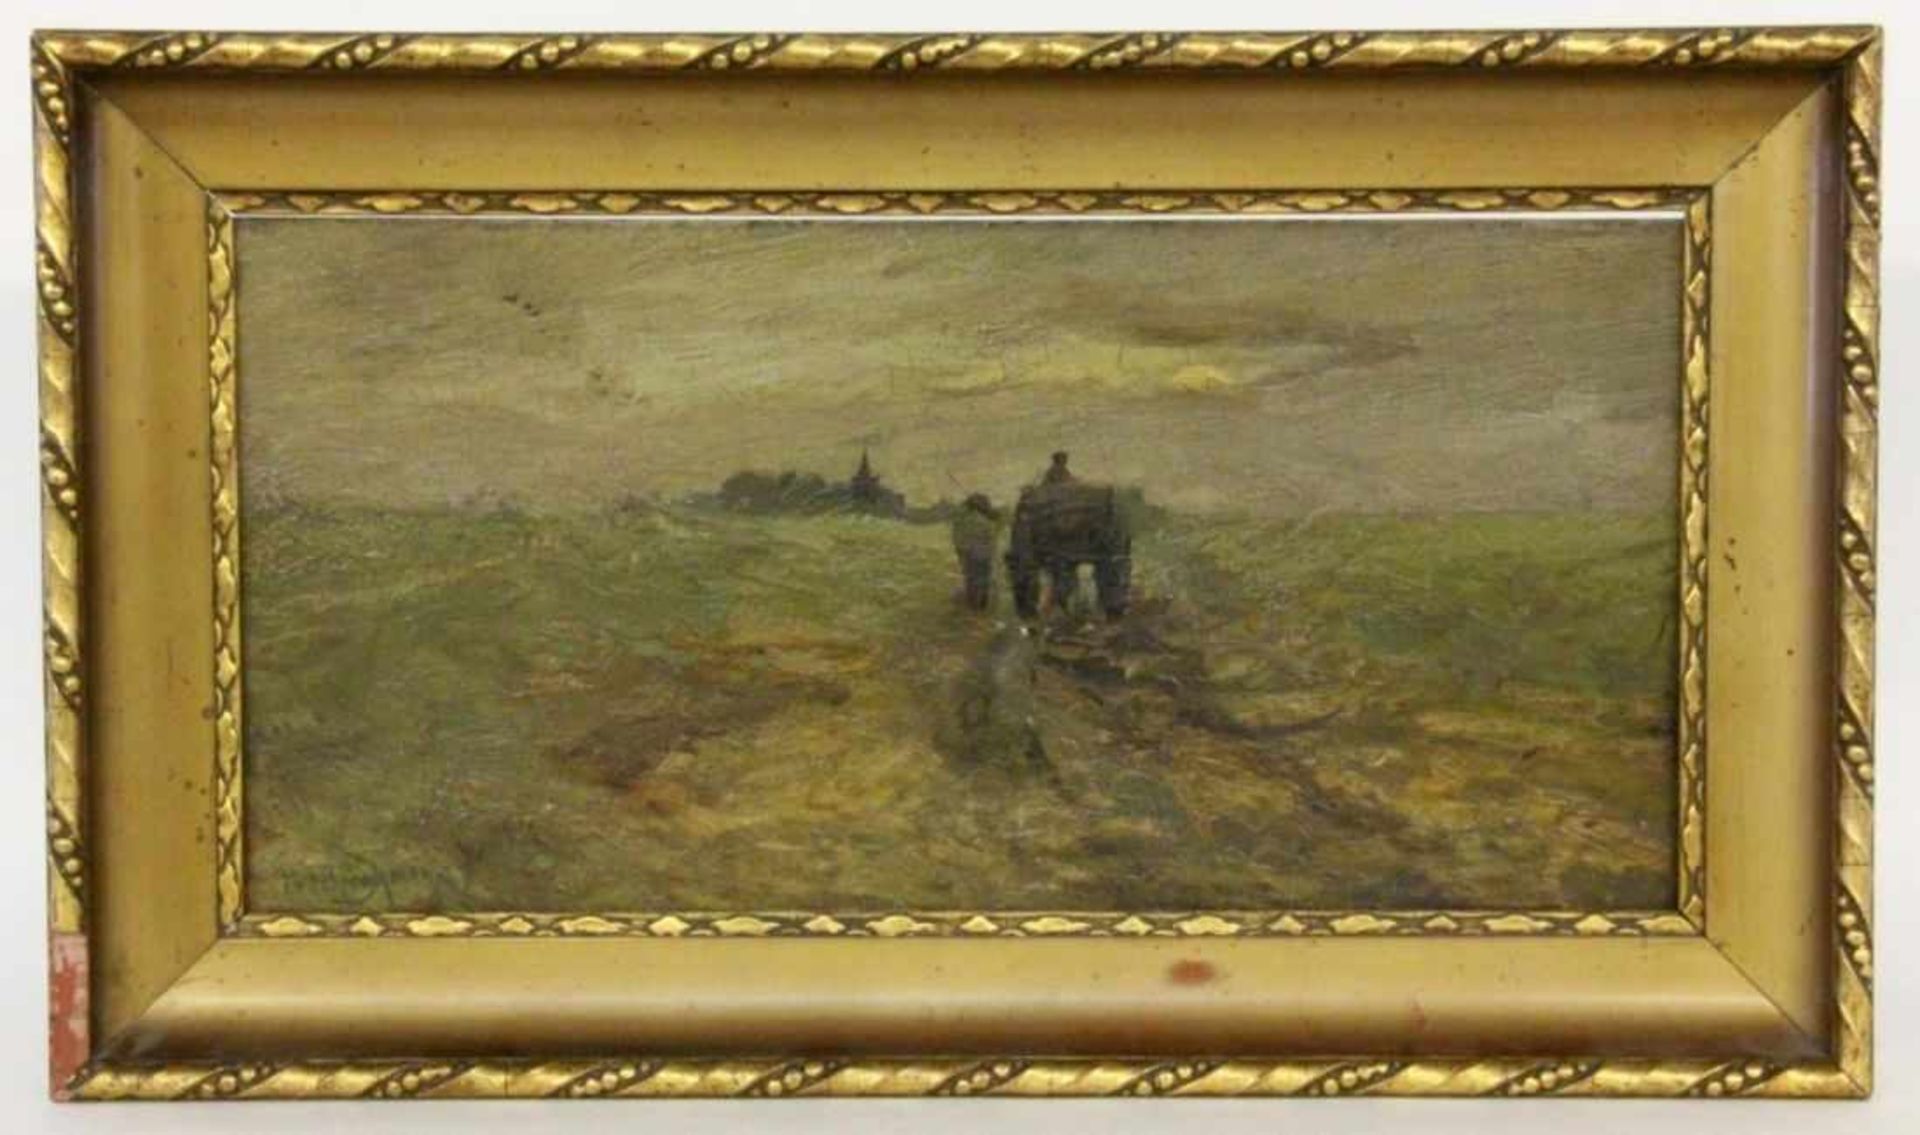 BERGH, PIET VAN DEN Dutch painter 1865 - 1950 Returning farmers. Oil on panel, signed anddated: